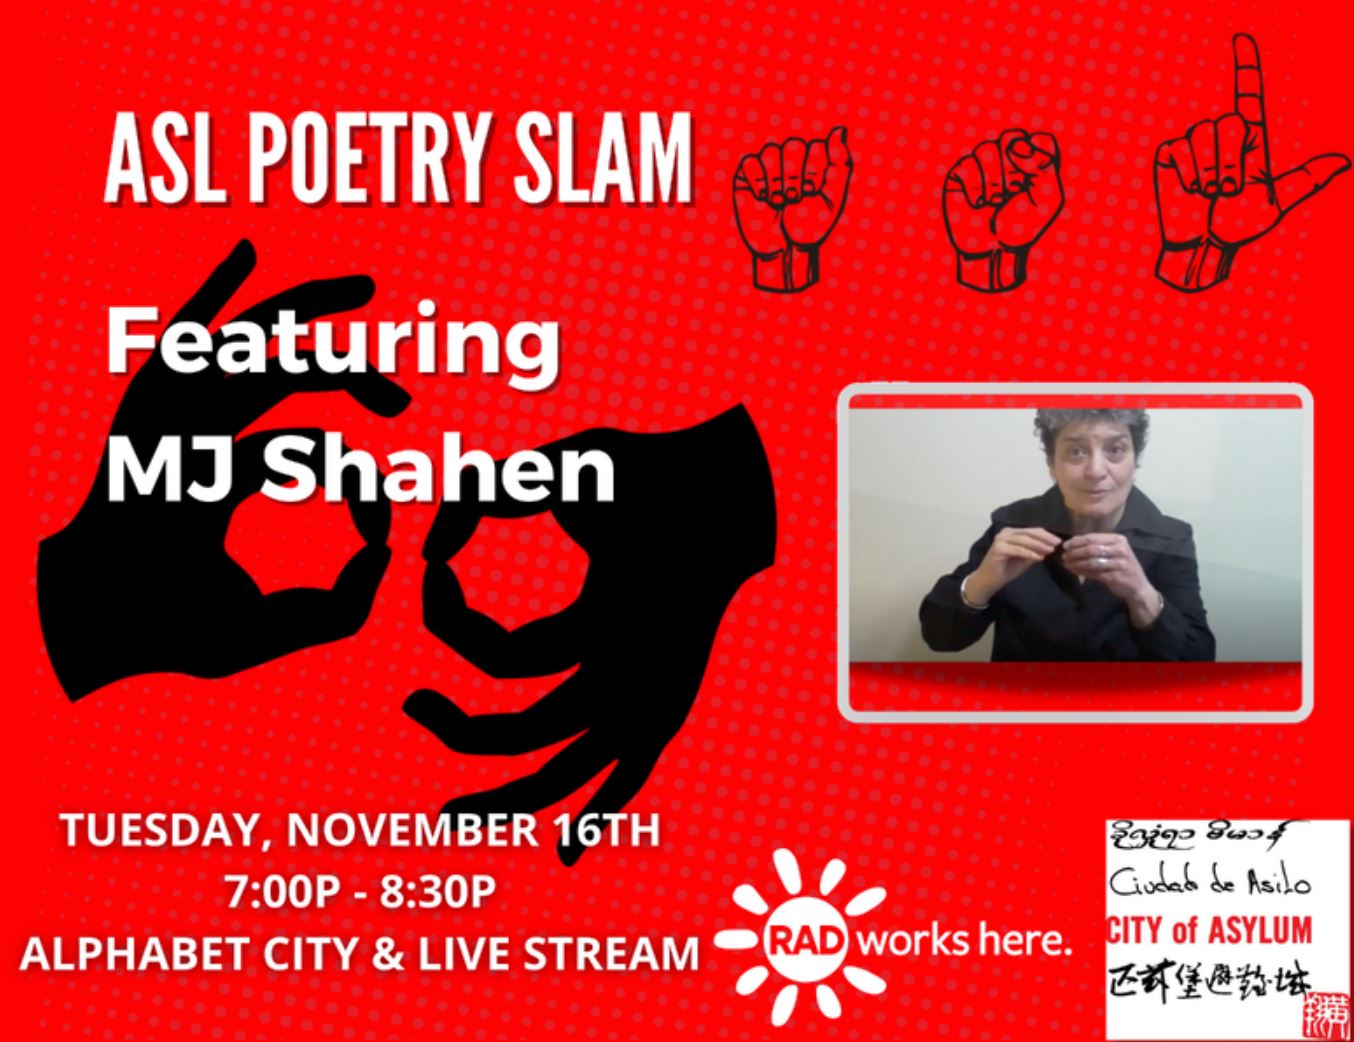 Red background with black sketches of hands signing A S L. Mj Shahen's photo on the right. White text reads: ASL Poetry Slam Featuring MJ Shahen, Tuesday, November 16th 7:00P - 8:30P. Alphabet City & Live Stream. RAD works here and City of Asylum logos at the bottom.